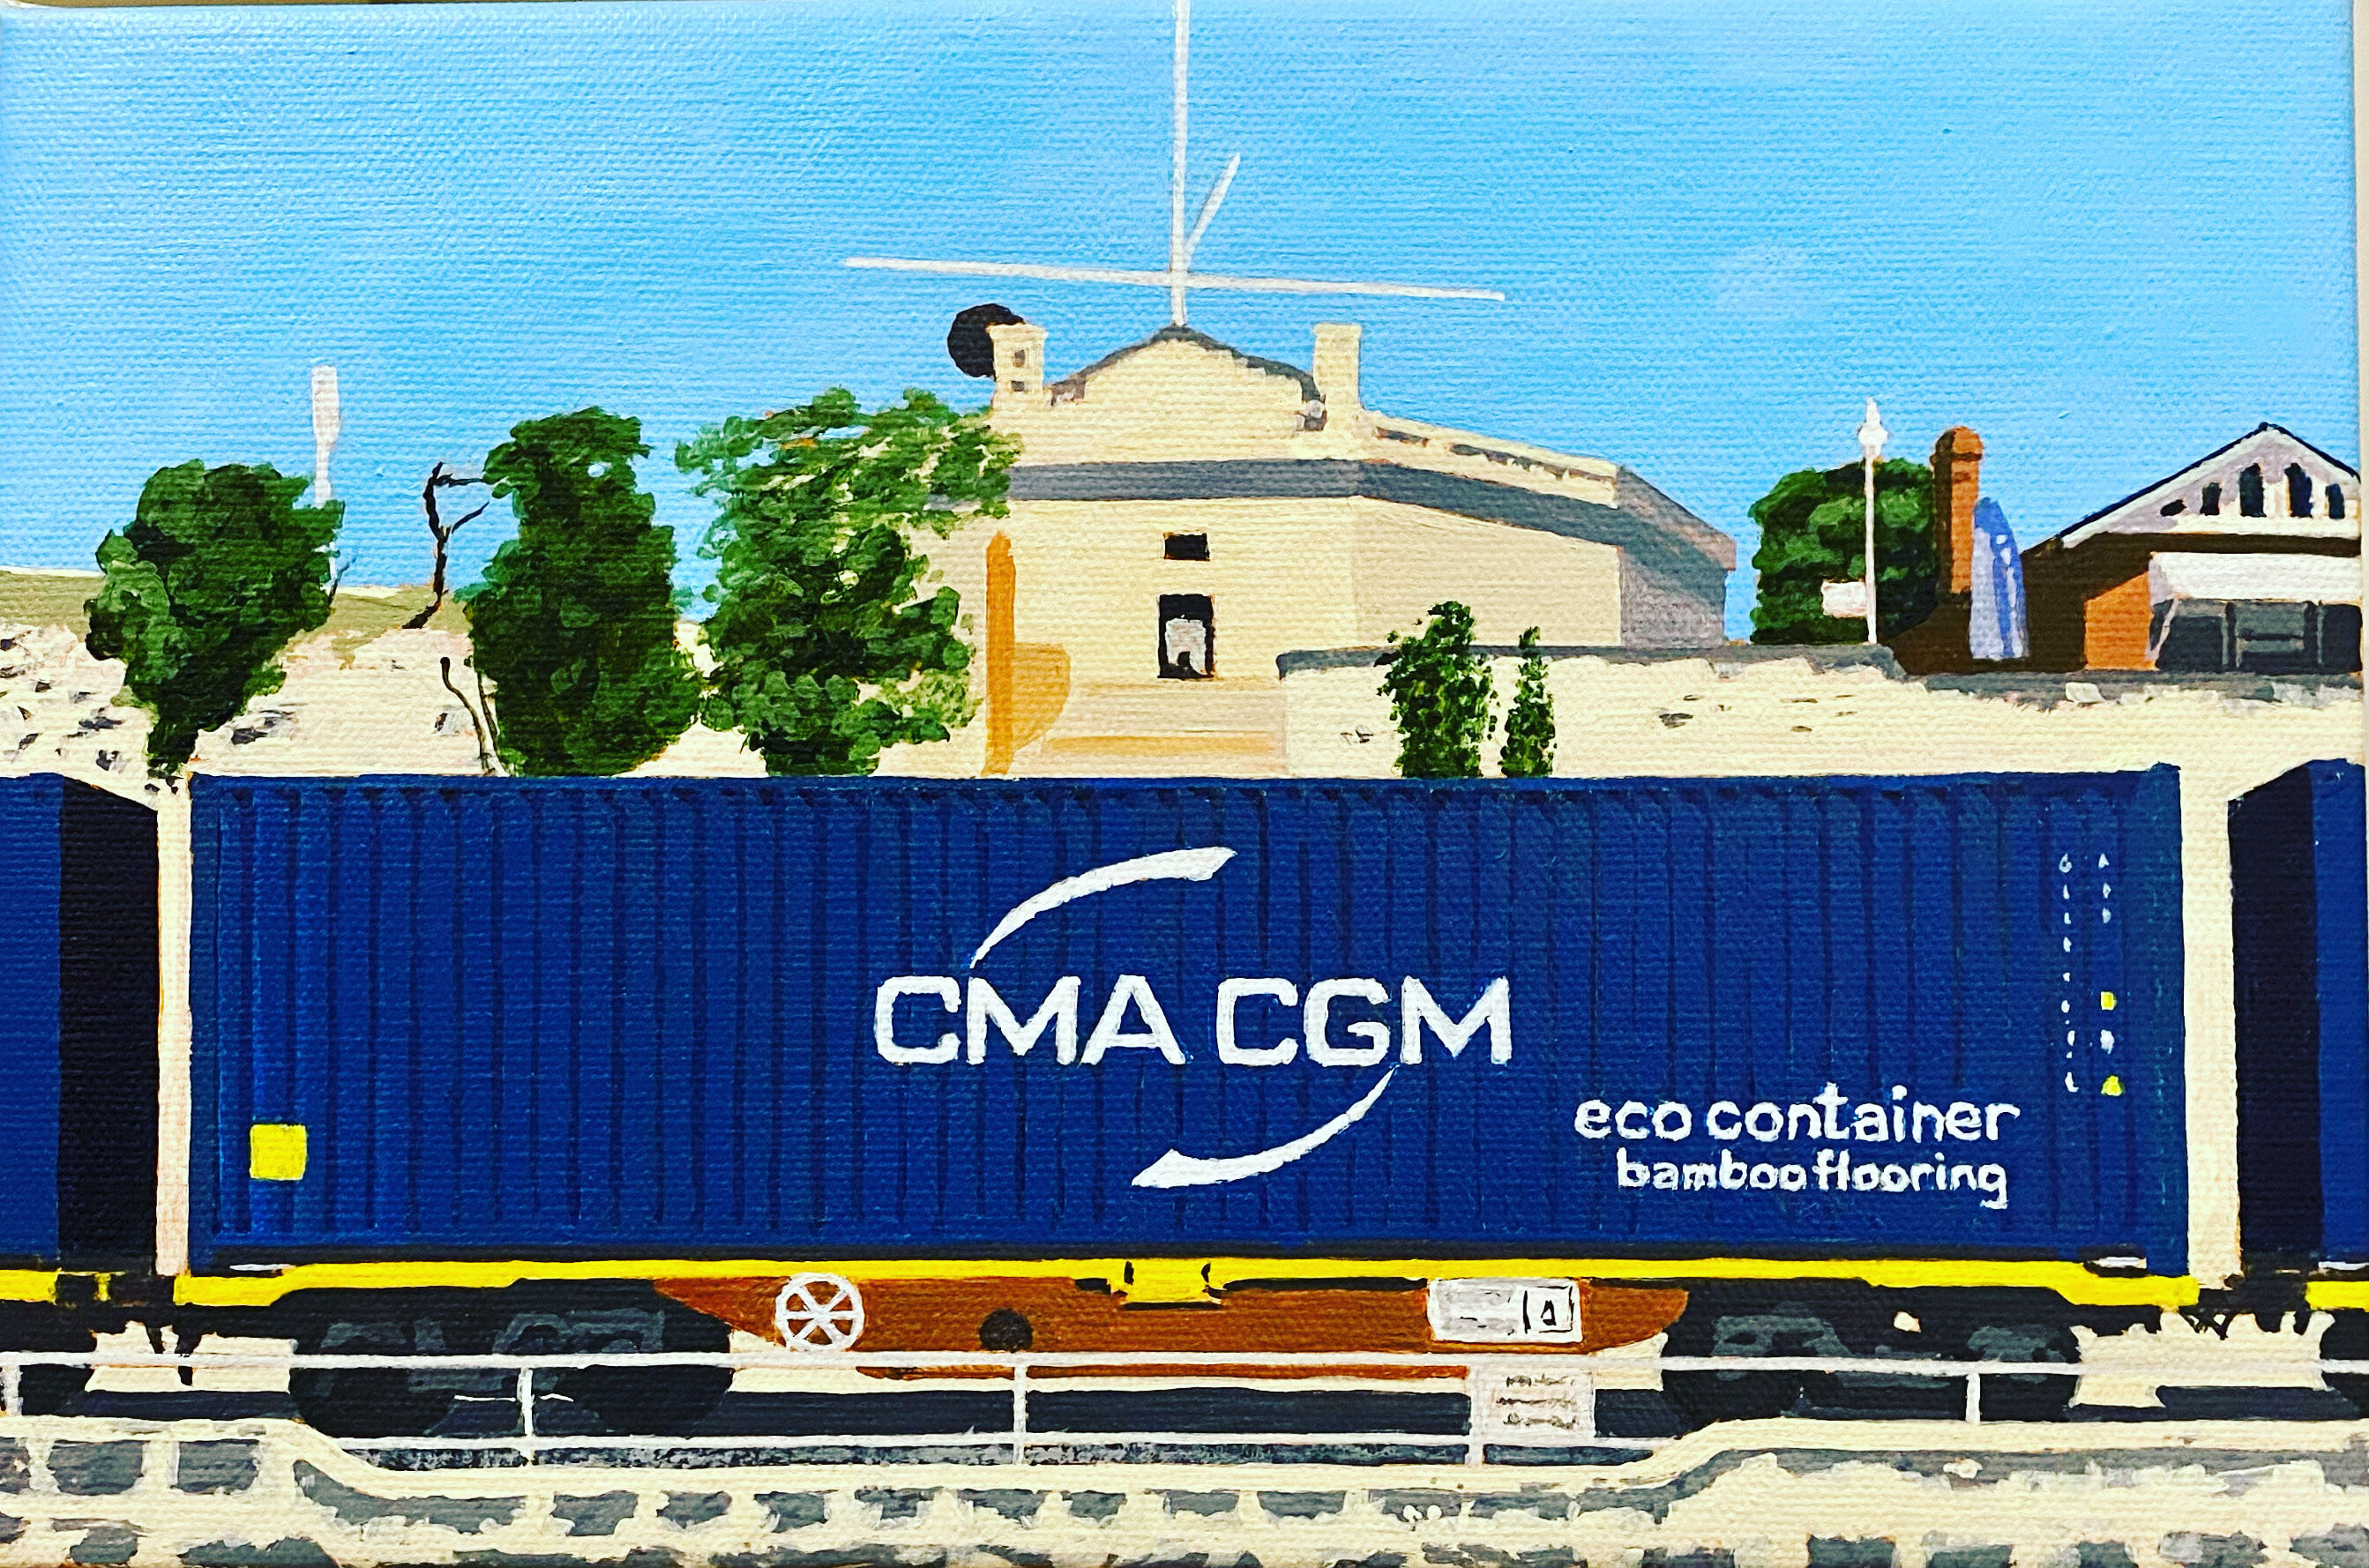 Container Train and Roundhouse, Fremantle